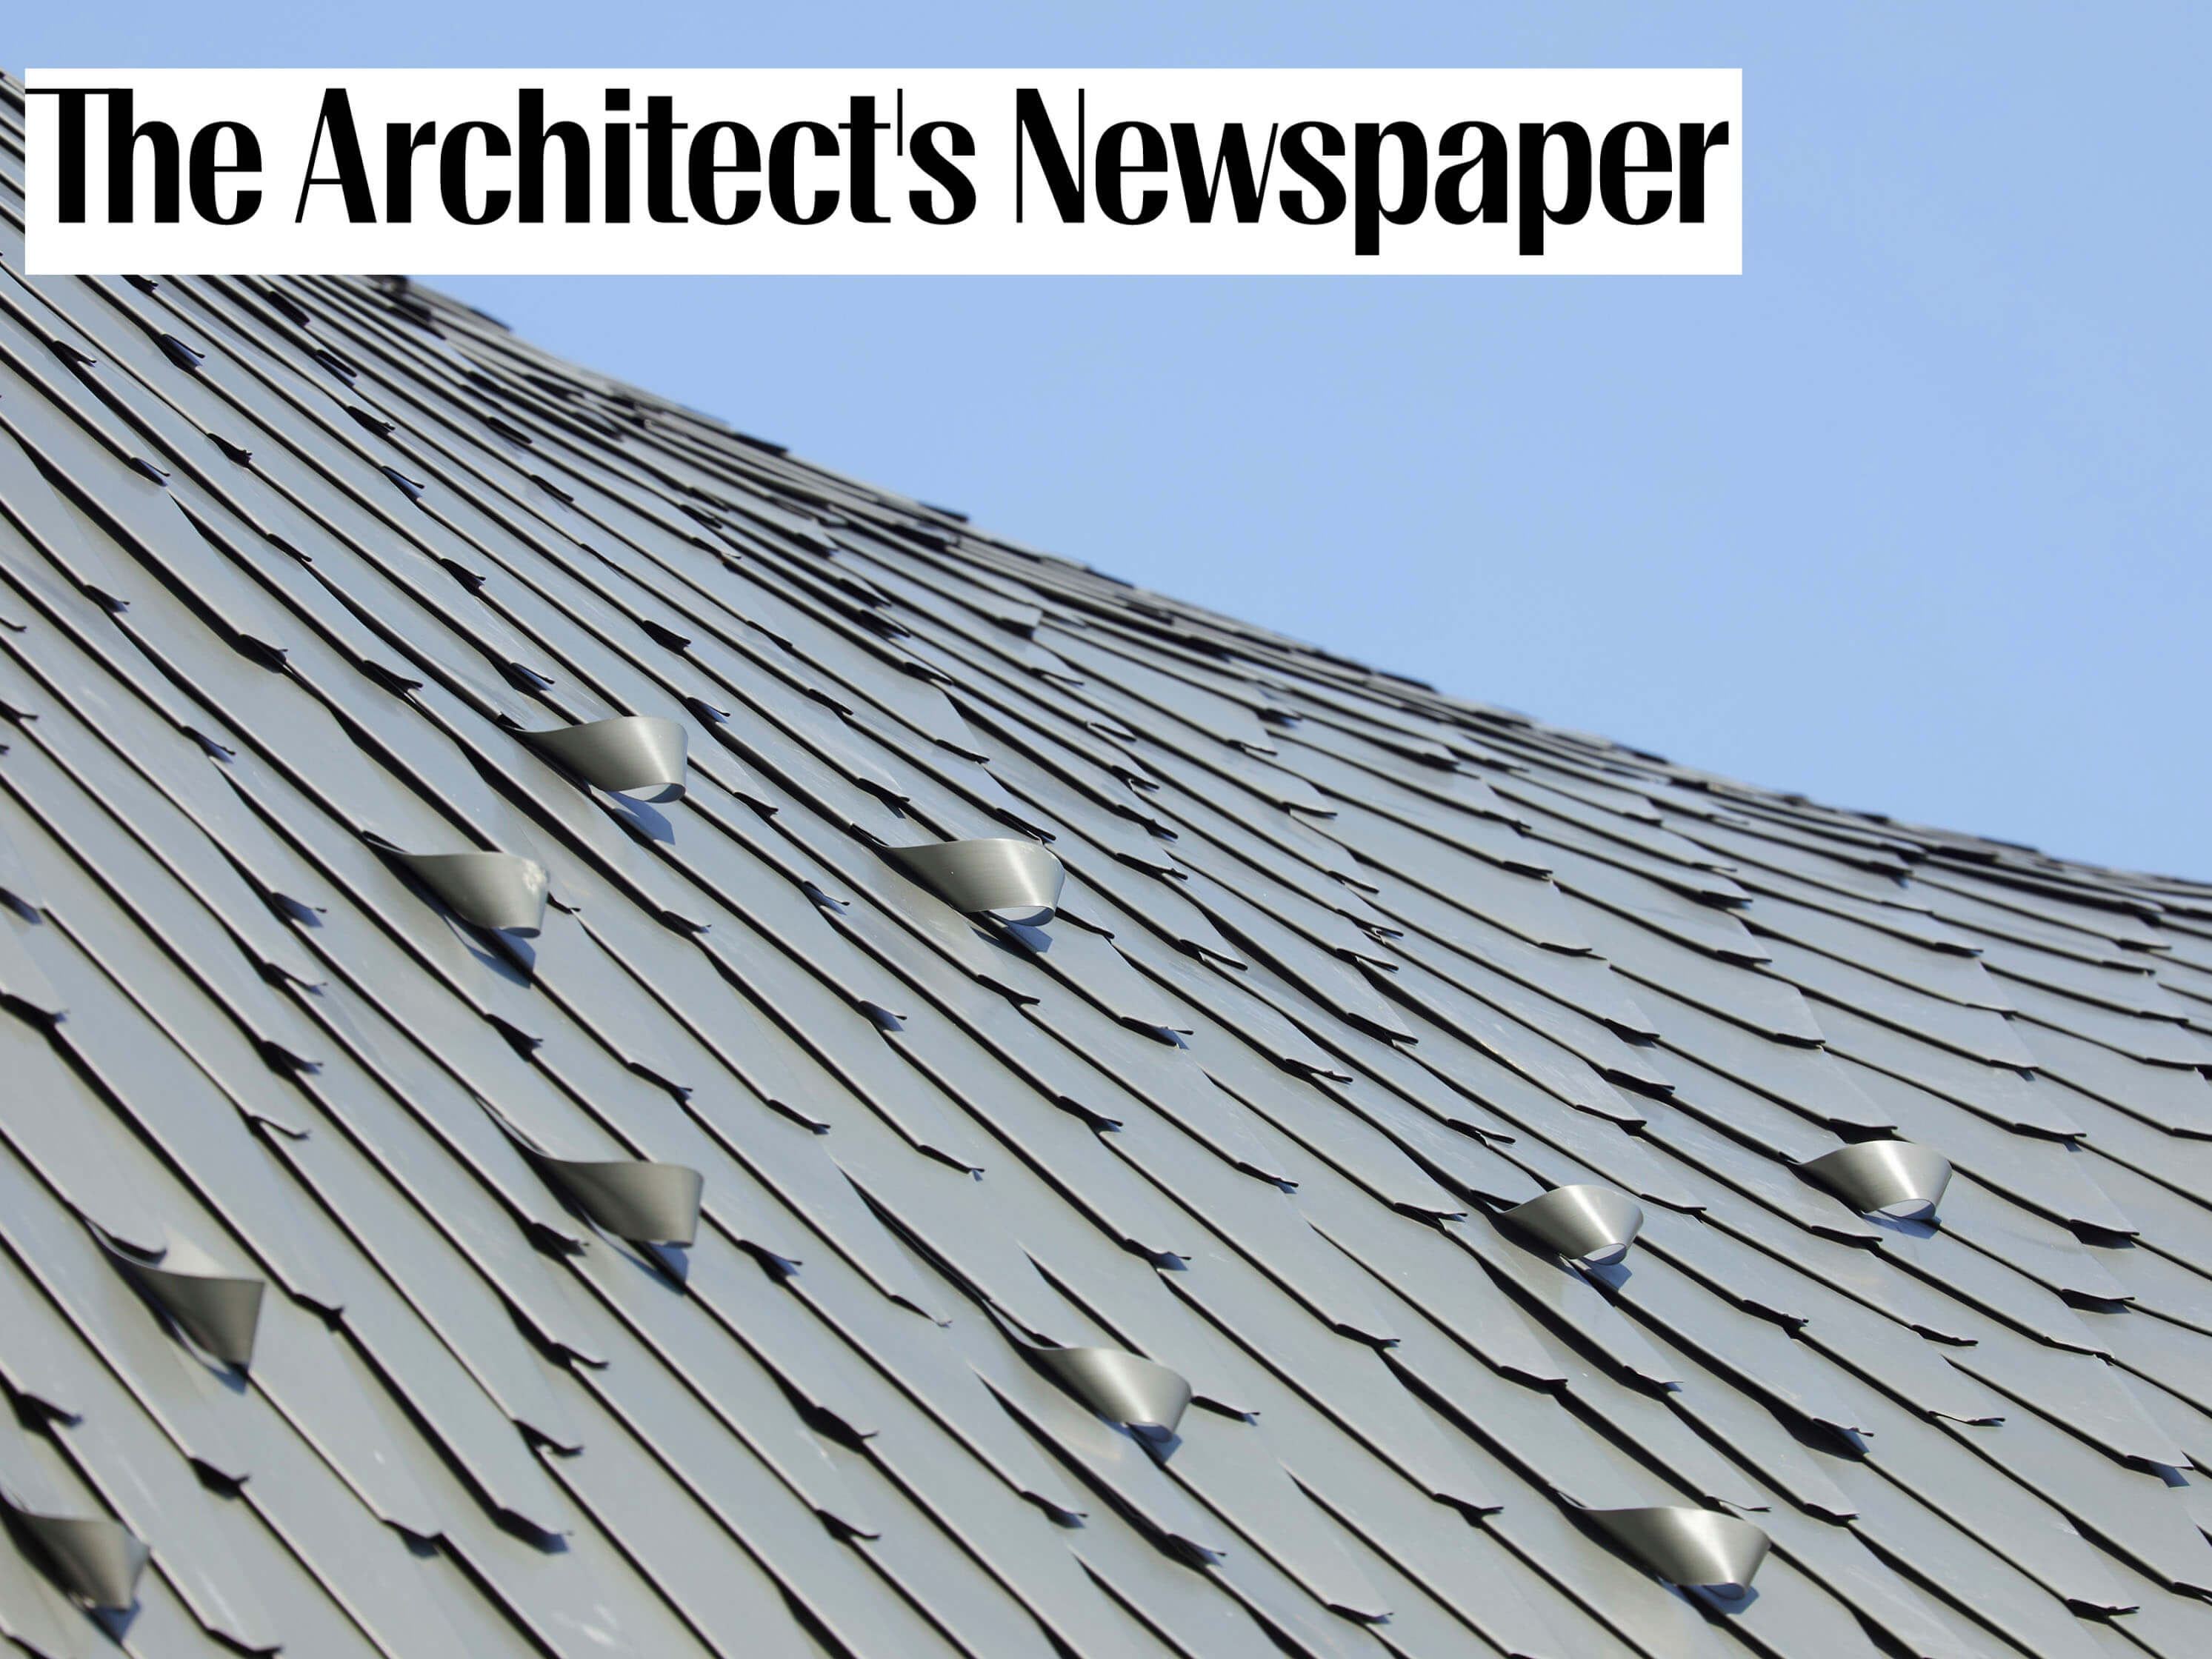 Image of Bézier Curve House Hi-lighted in The Architect's Newspaper